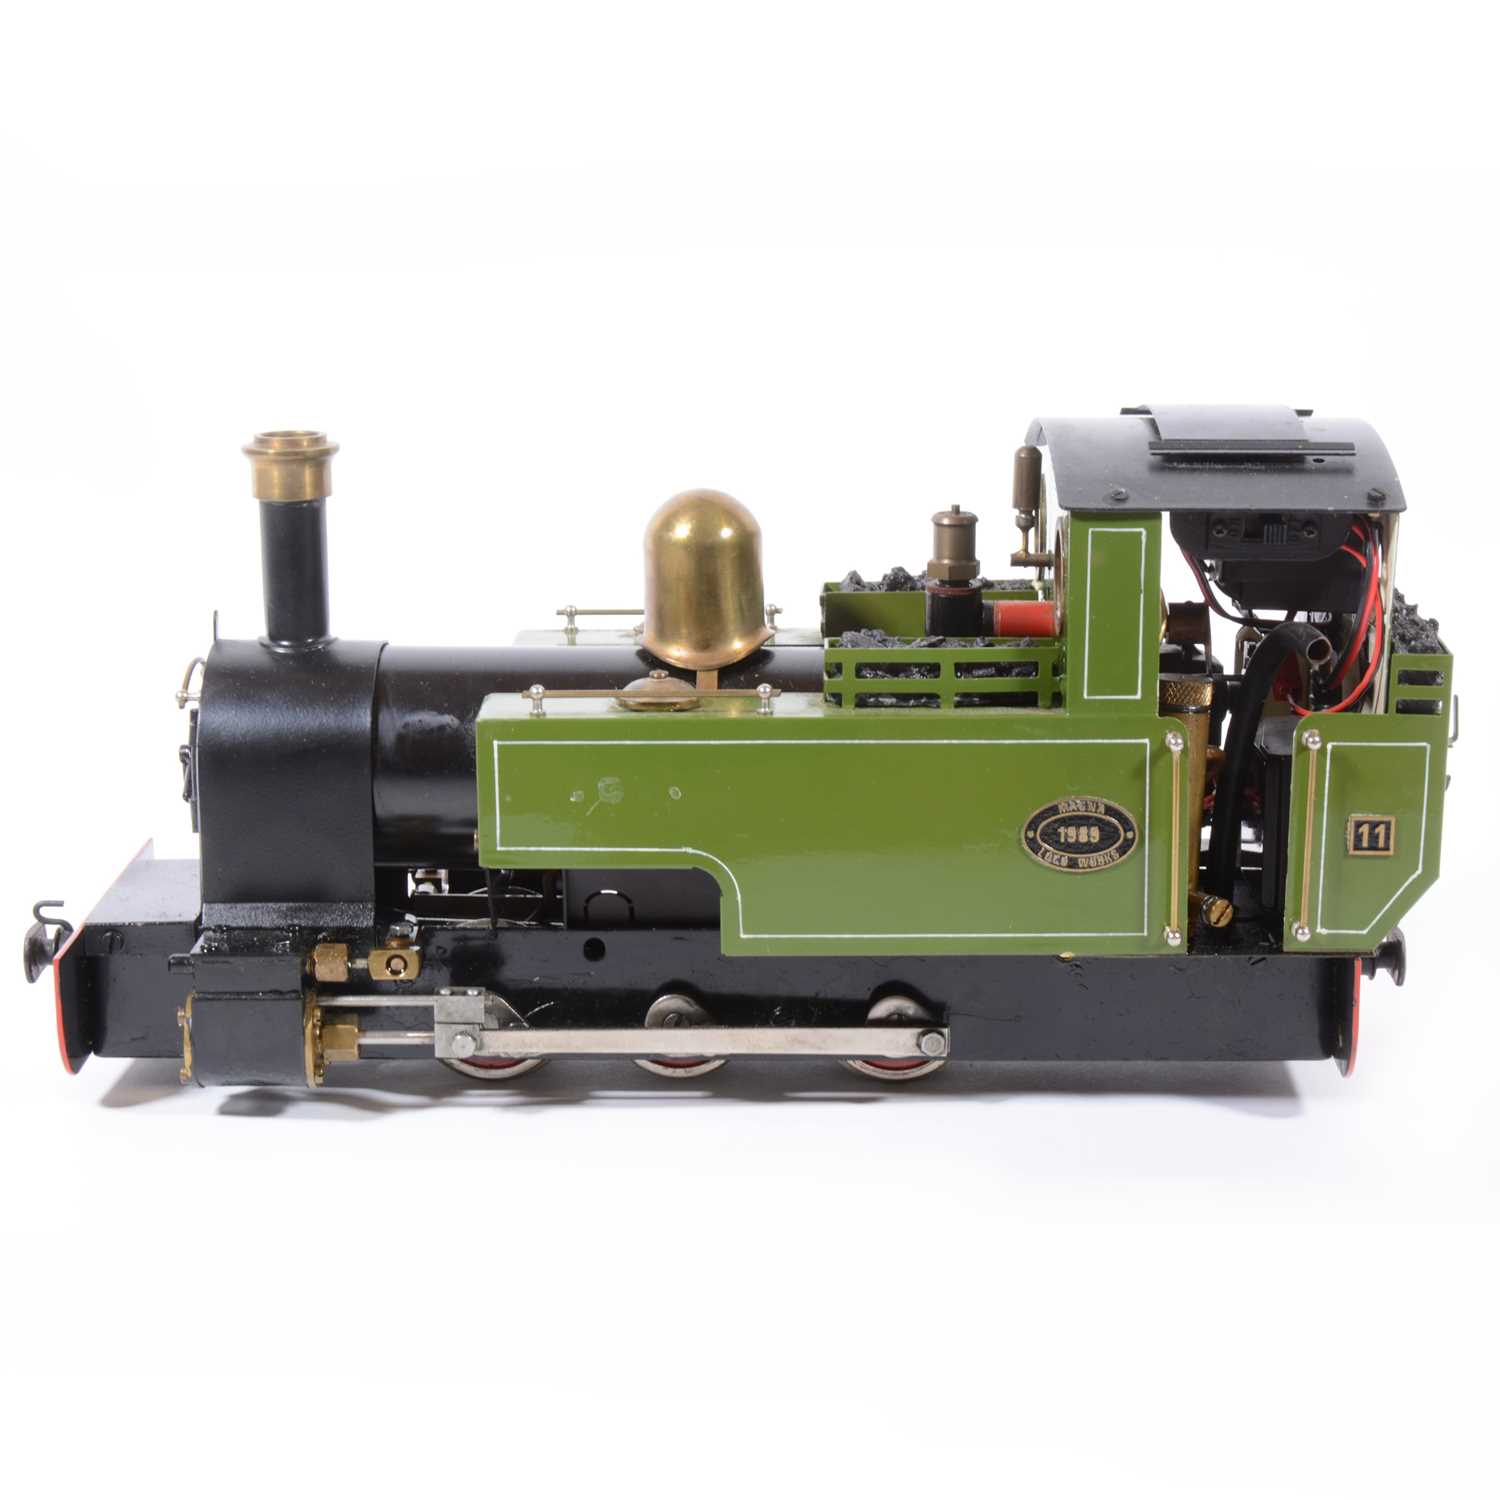 Lot 24 - Roundhouse live steam, gauge 1 / G scale, 32mm locomotive, 'Lady Anne' 0-6-0.